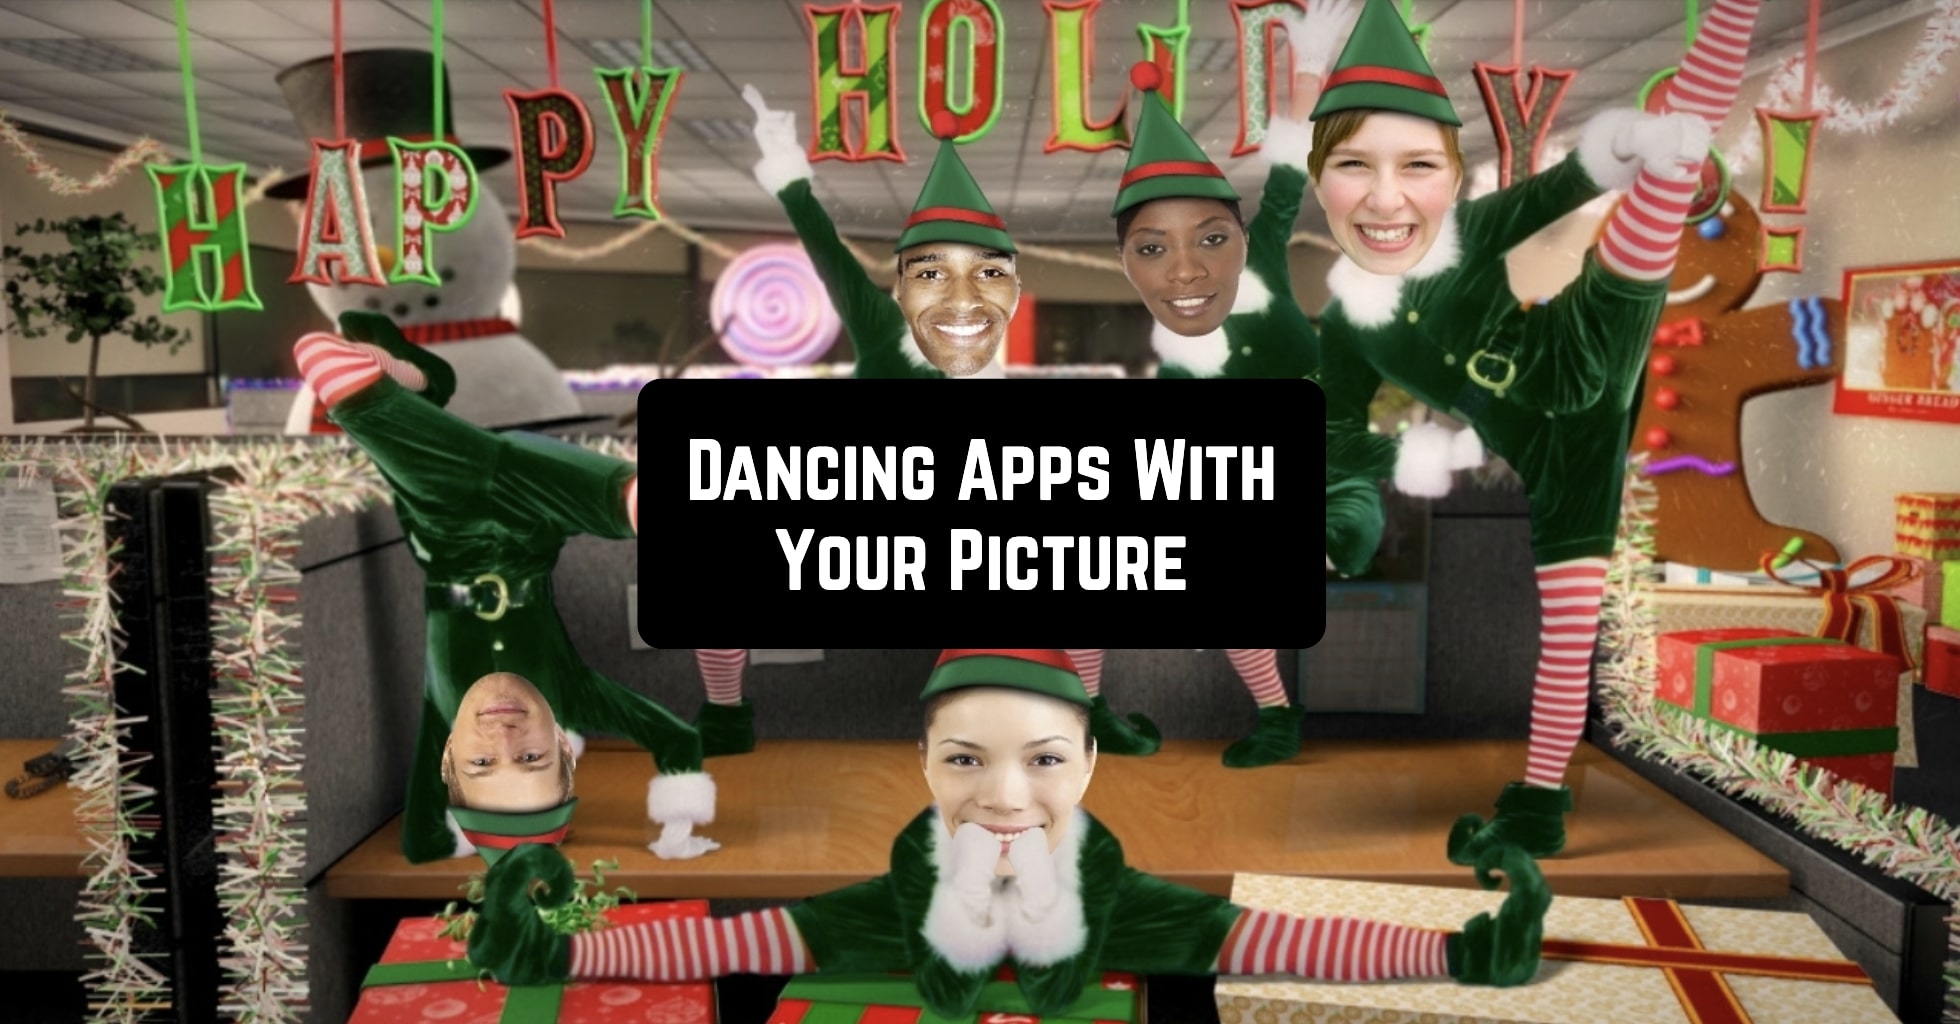 15 Dancing Apps With Your Picture For Android & iOS | Free apps for Android  and iOS